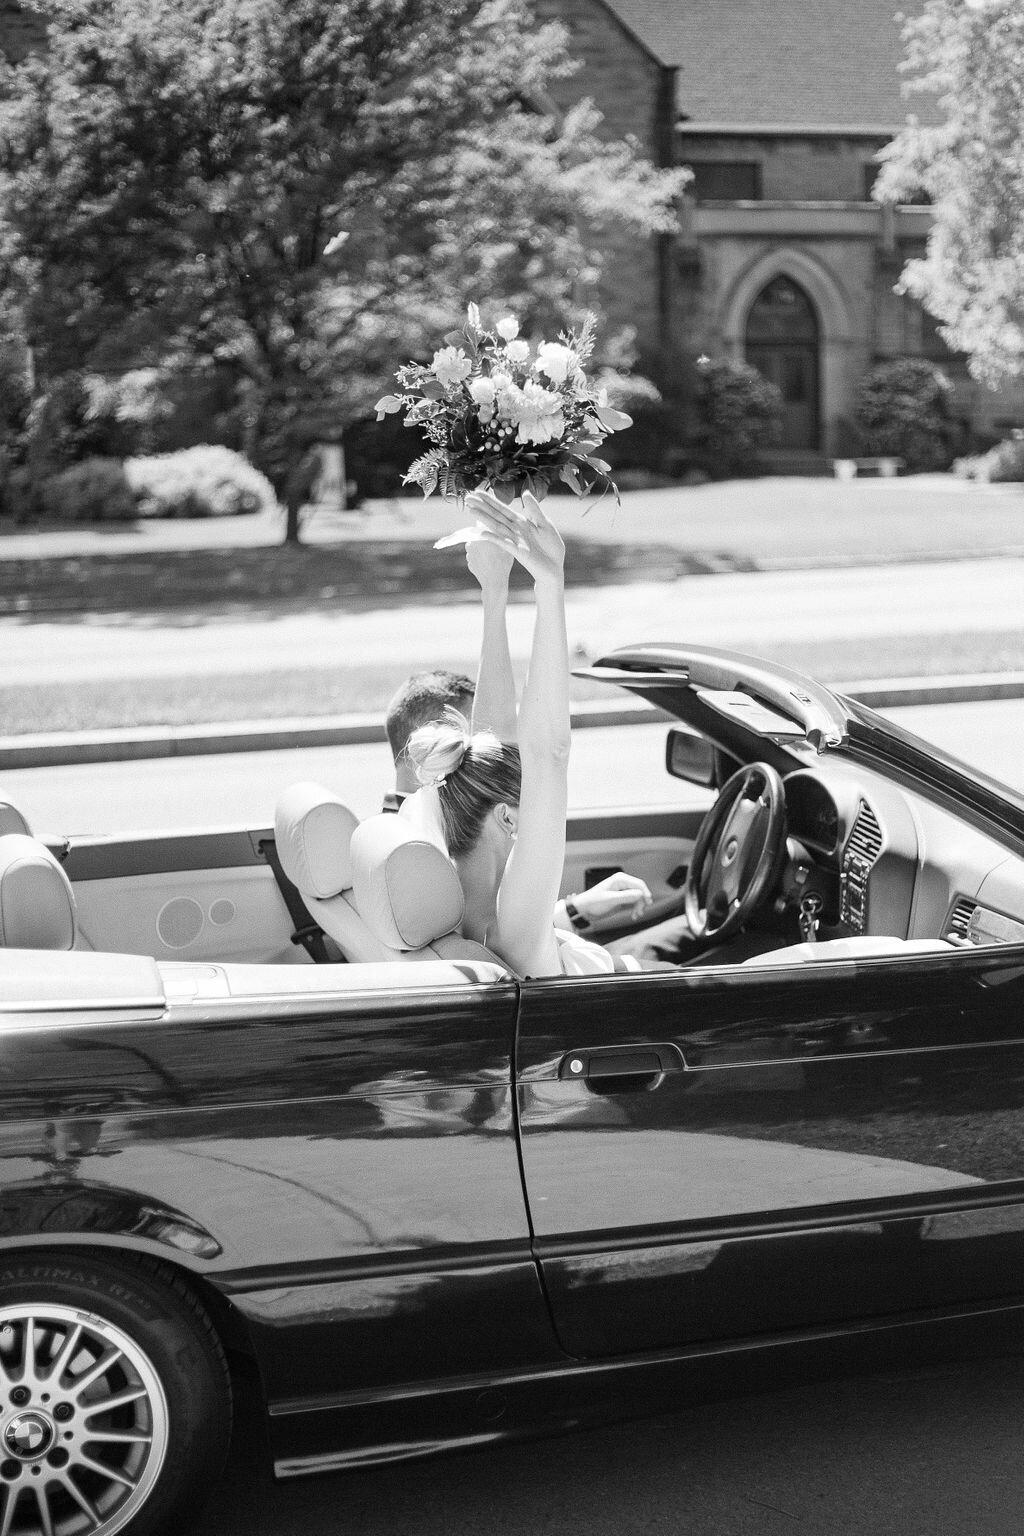 Rochester NY wedding photographer Emi Rose Studio captures candid wedding photos in black and white